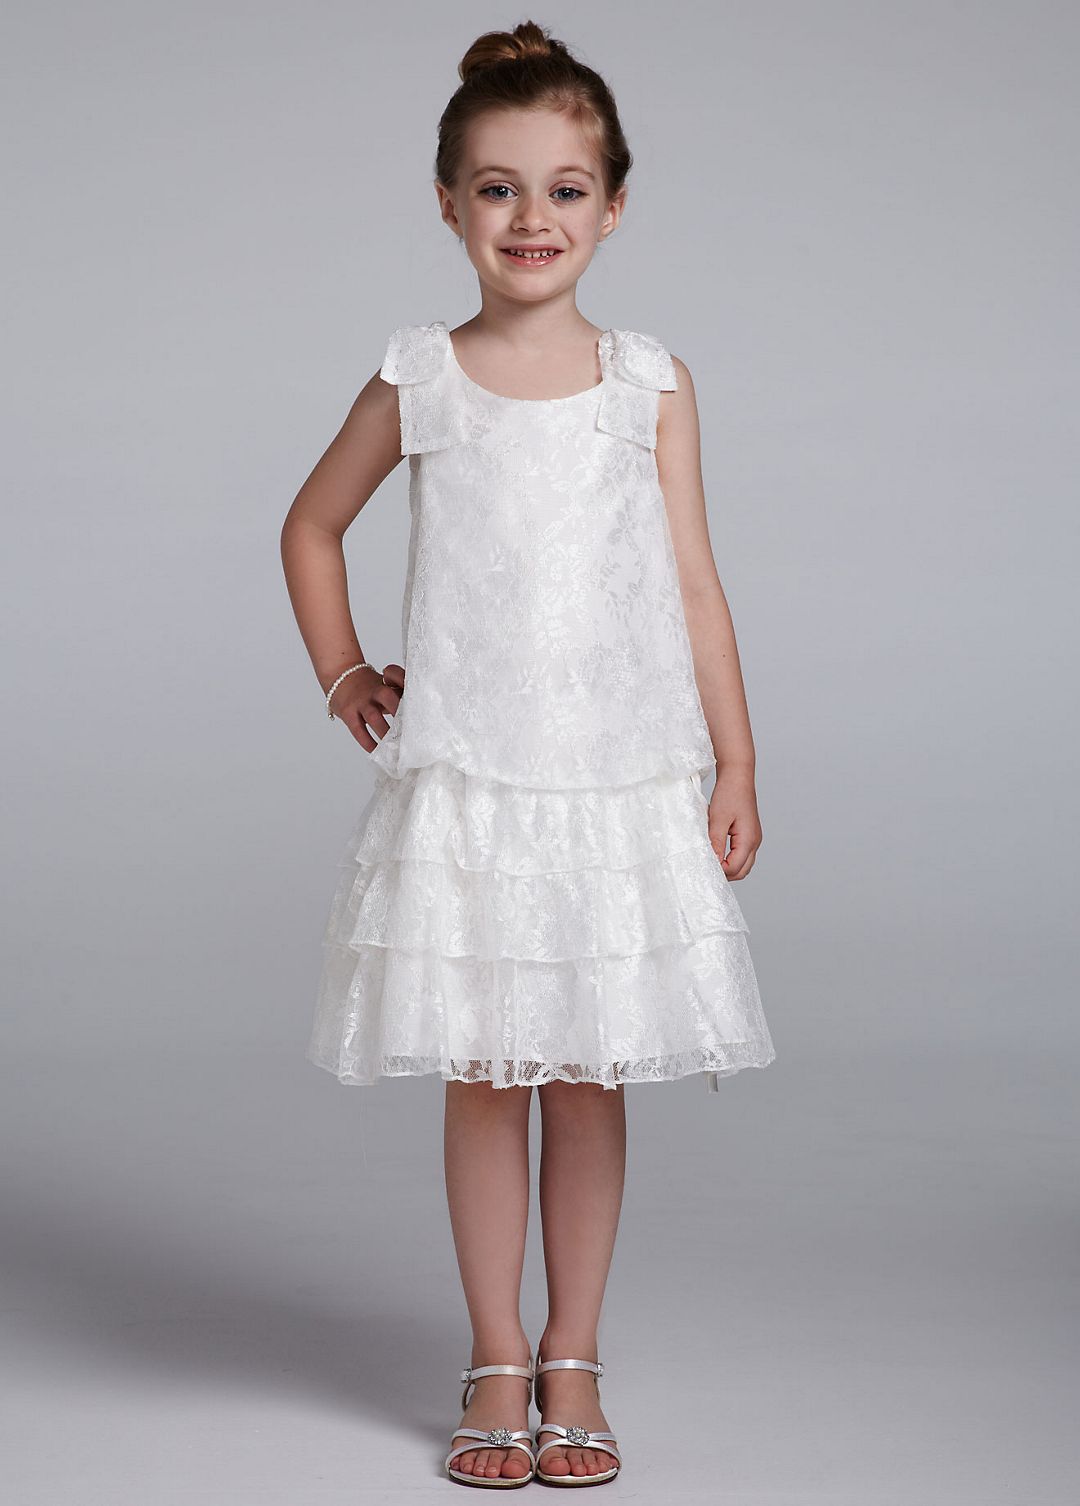 All Over Lace Tank Dress with Bows Image 1